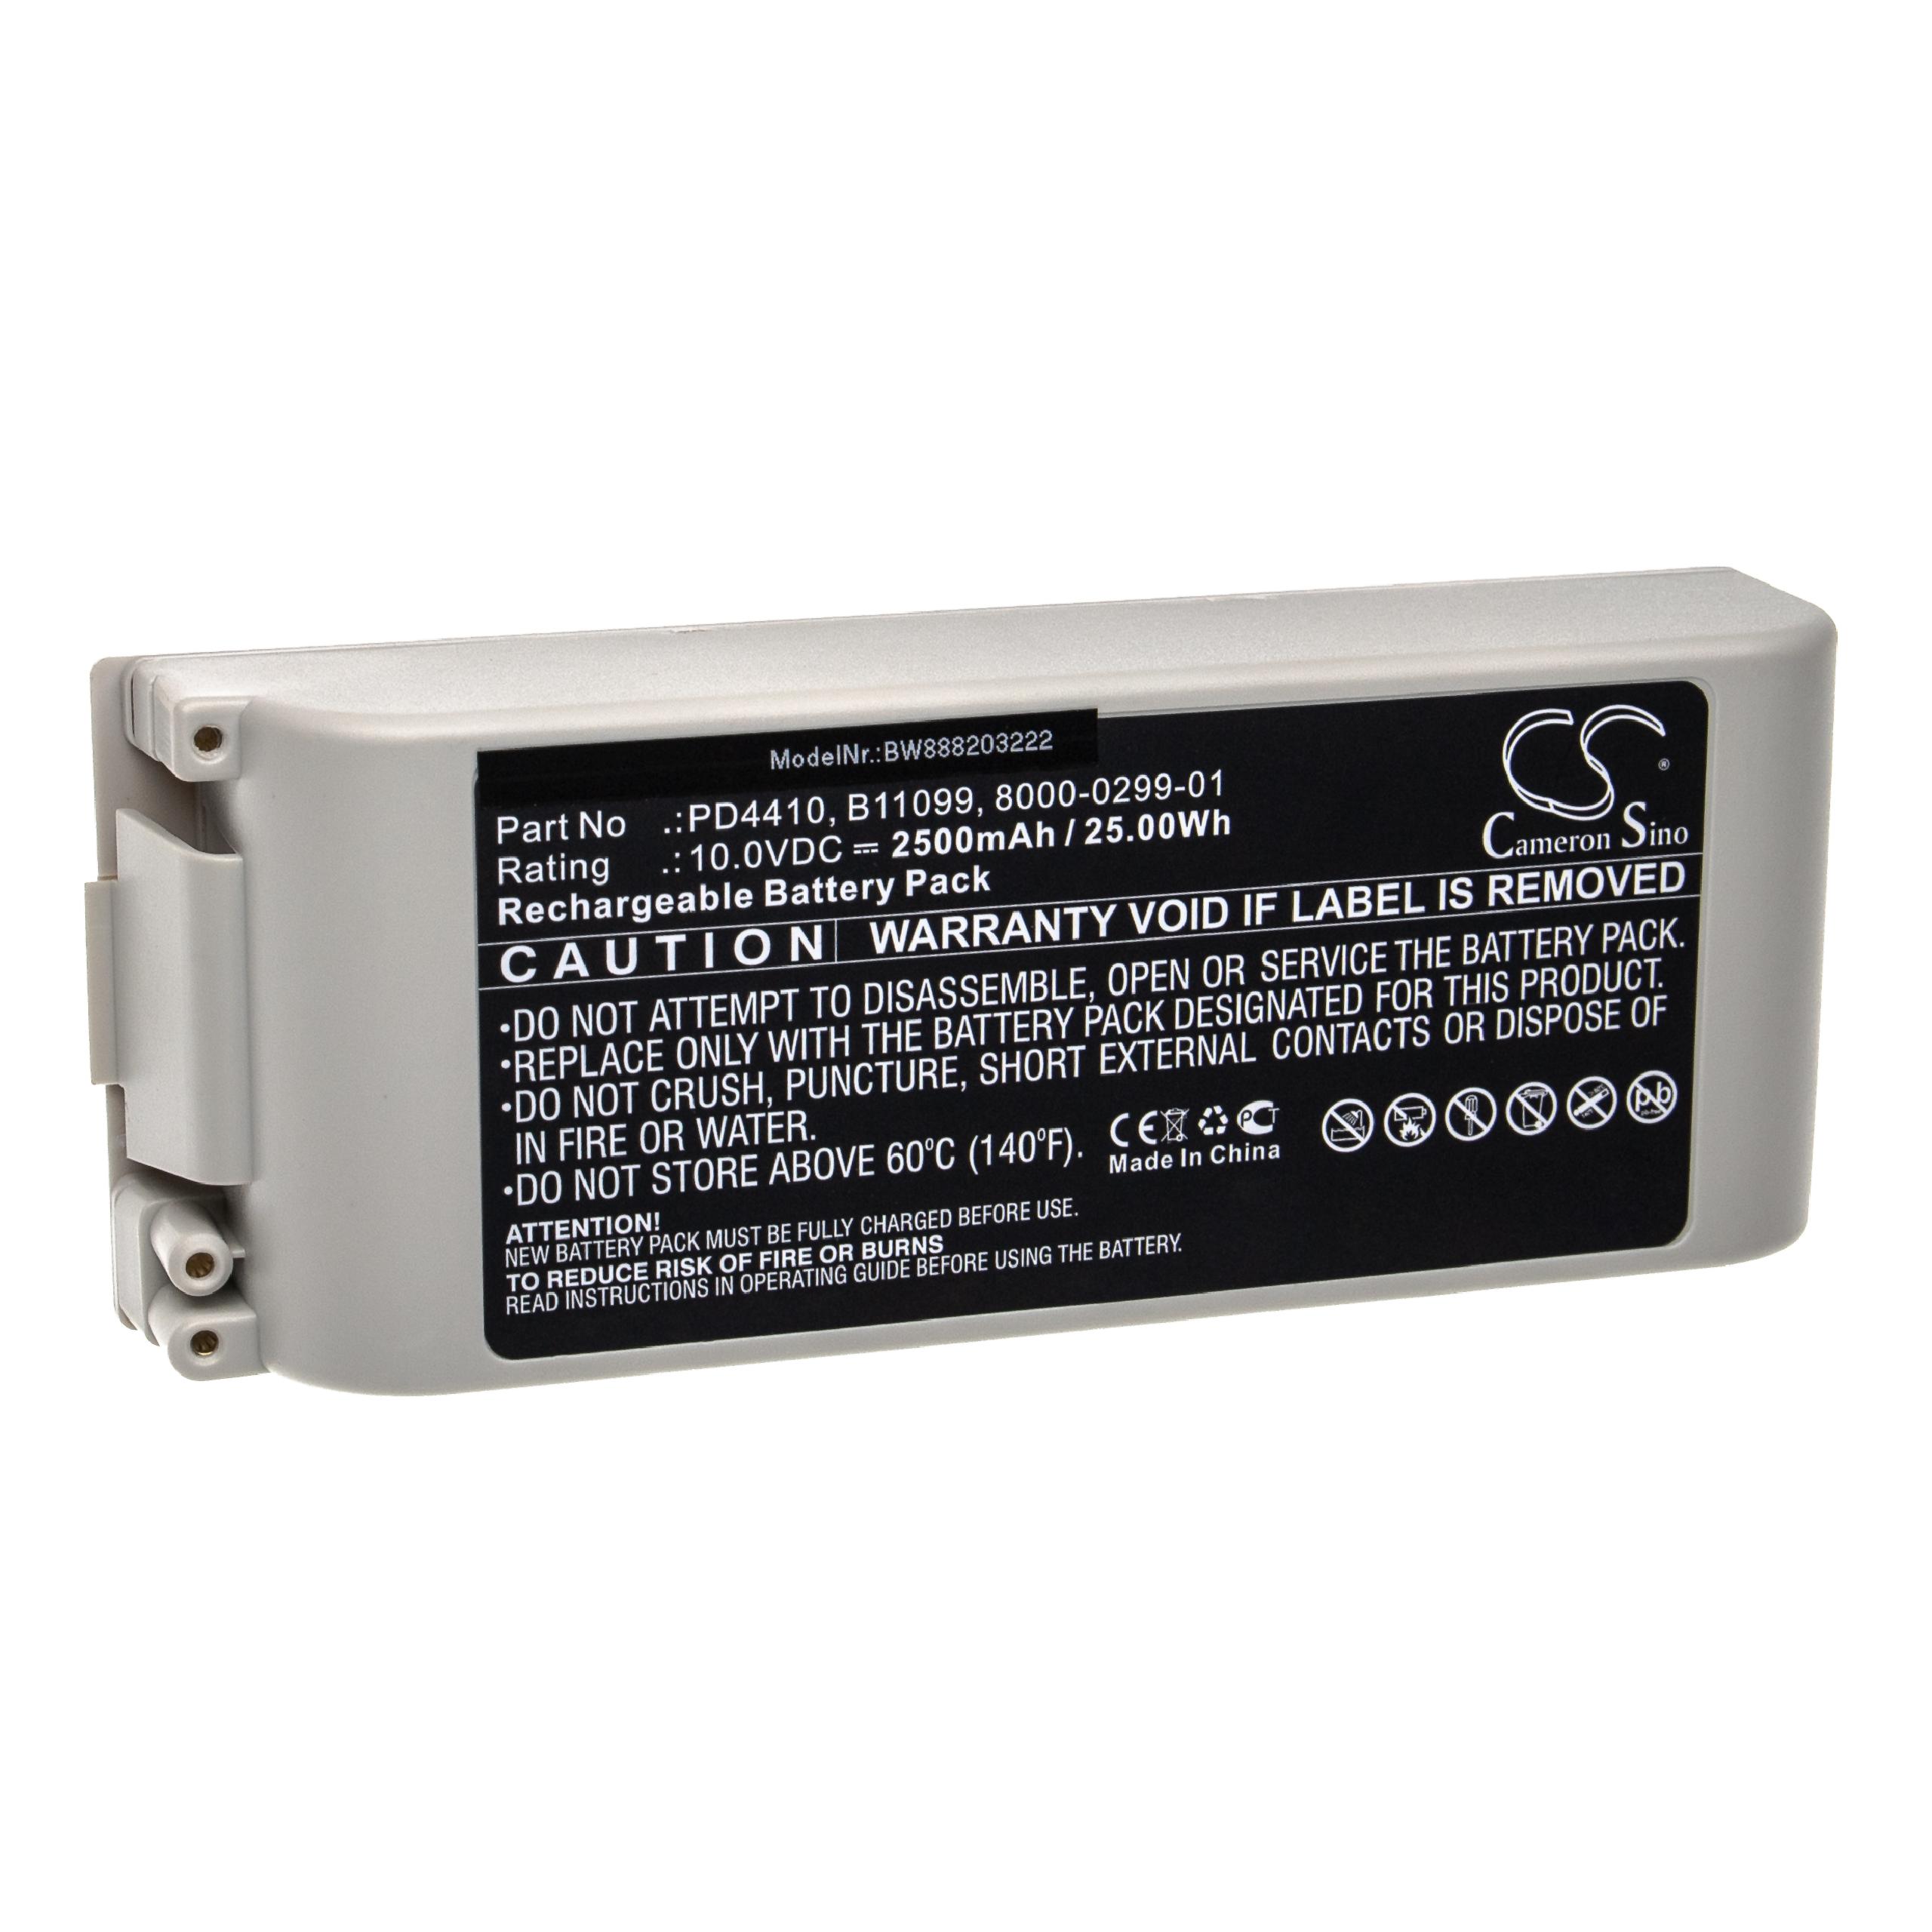 Medical Equipment Battery Replacement for ZOLL 8000-0299-01, B11099, 8000-0299-10, 110087 - 2500mAh 10V AGM